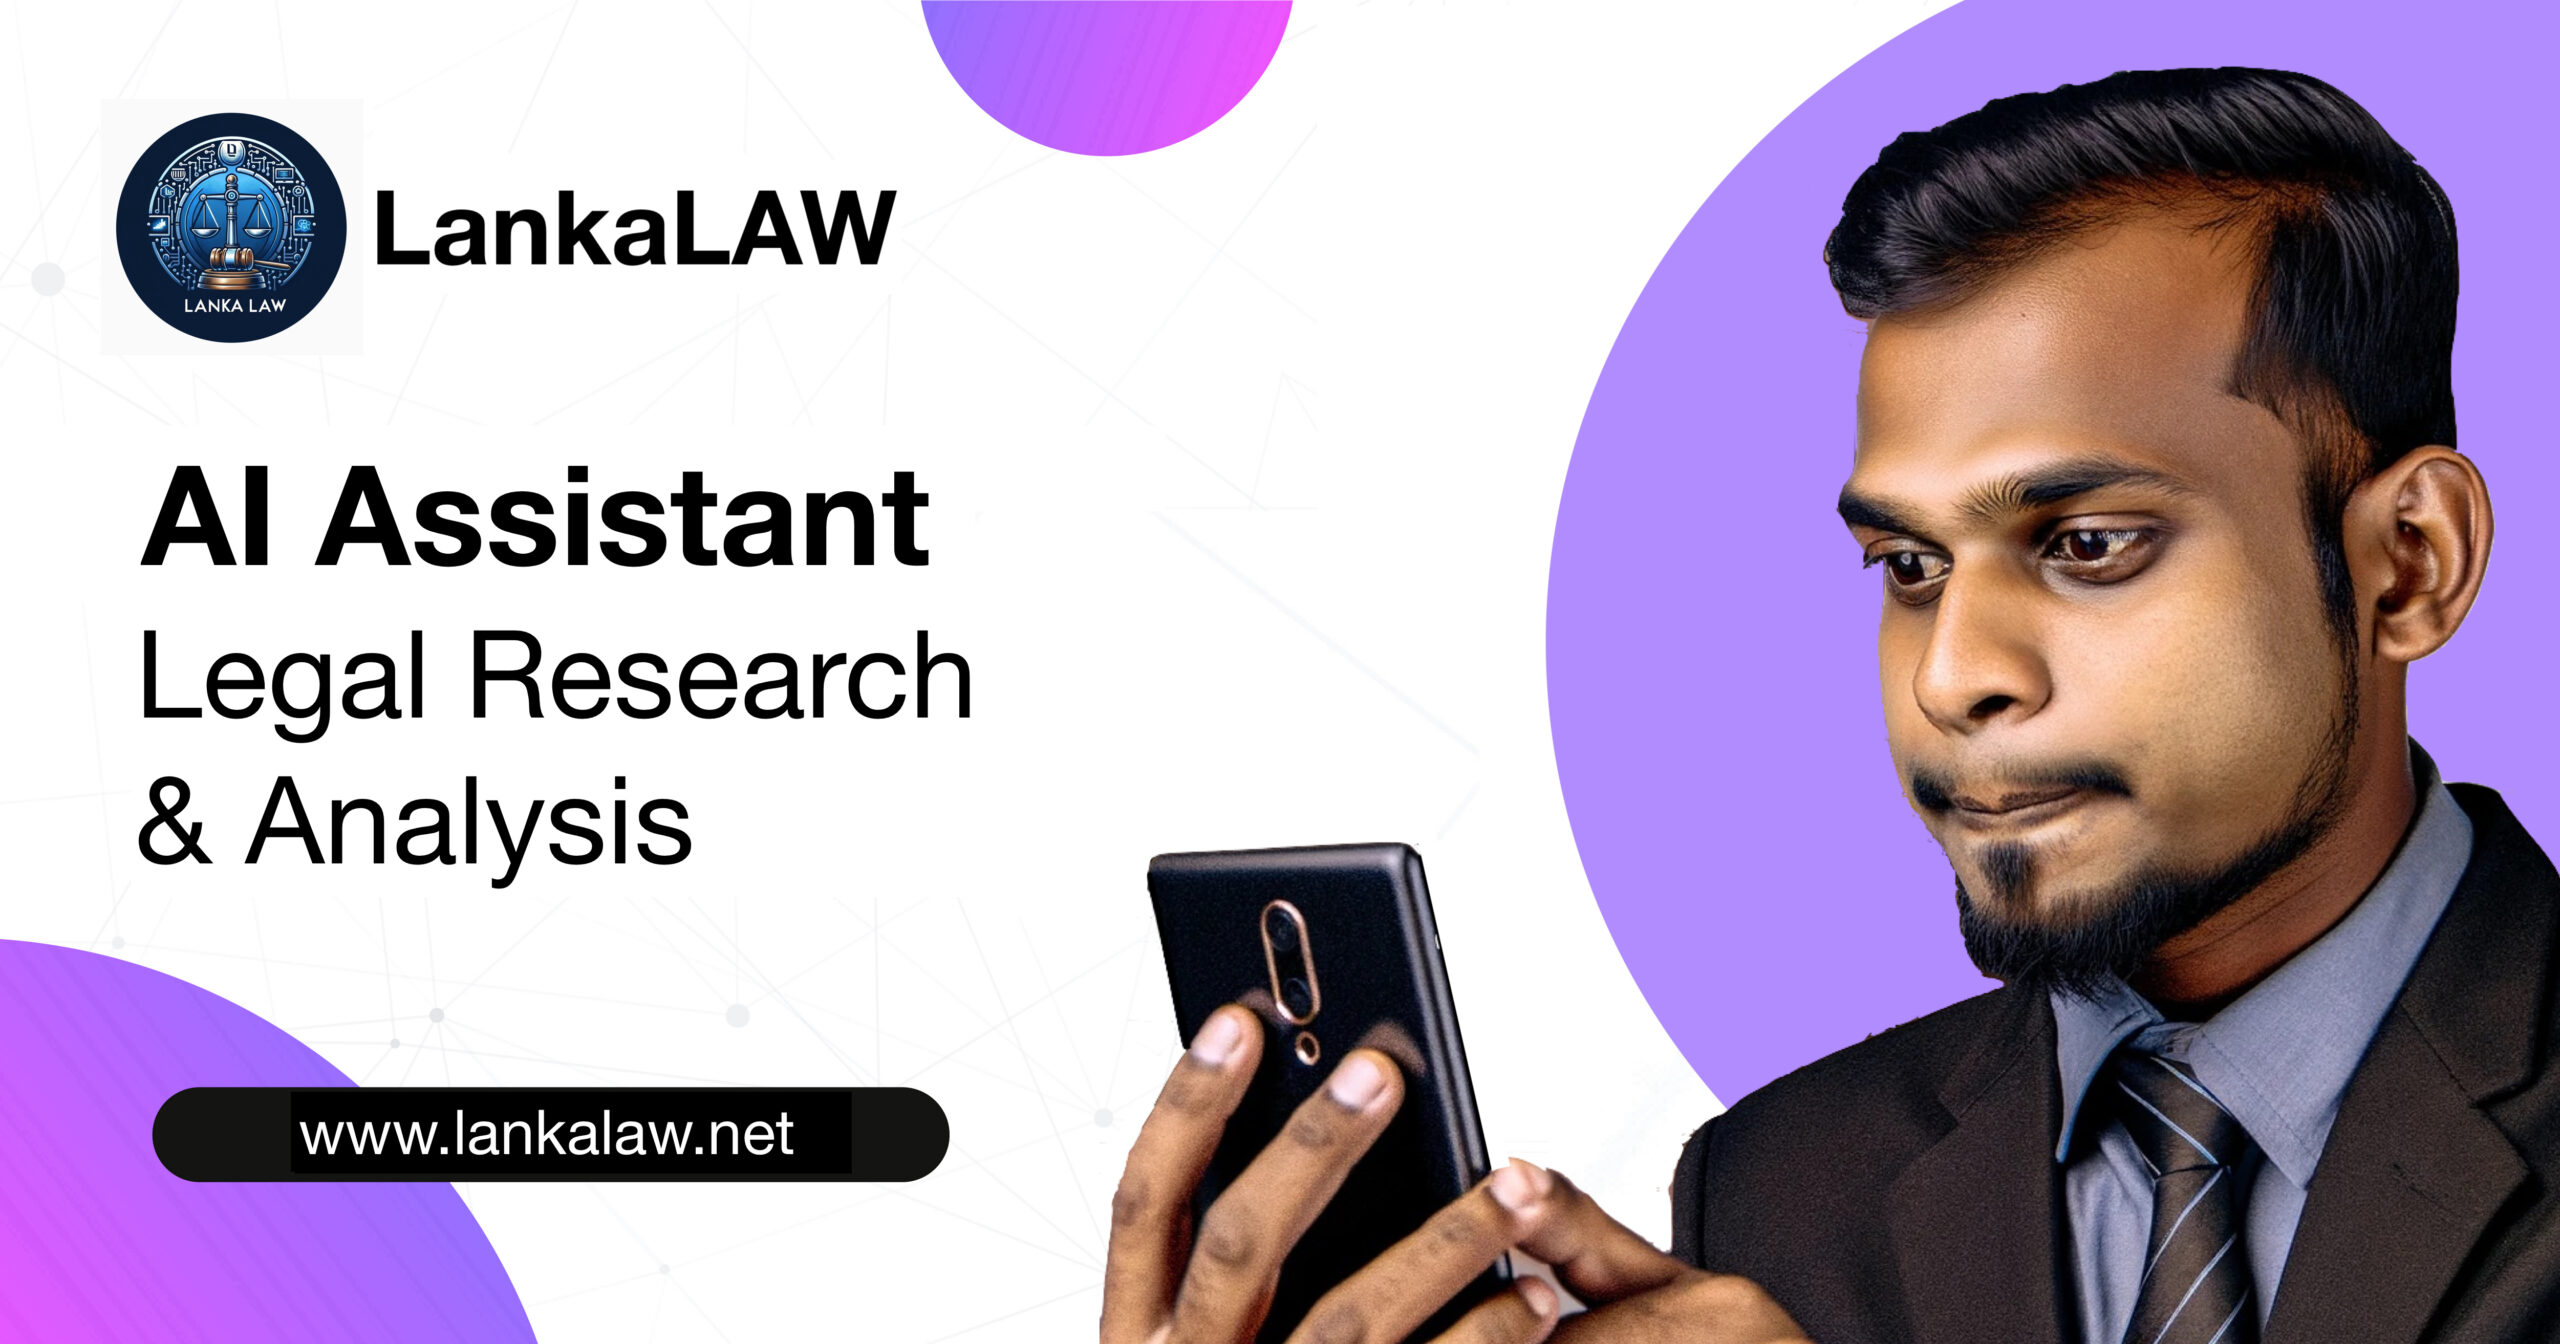 LankaLAW – First ever AI Assistant for Legal Research launched in Sri Lanka